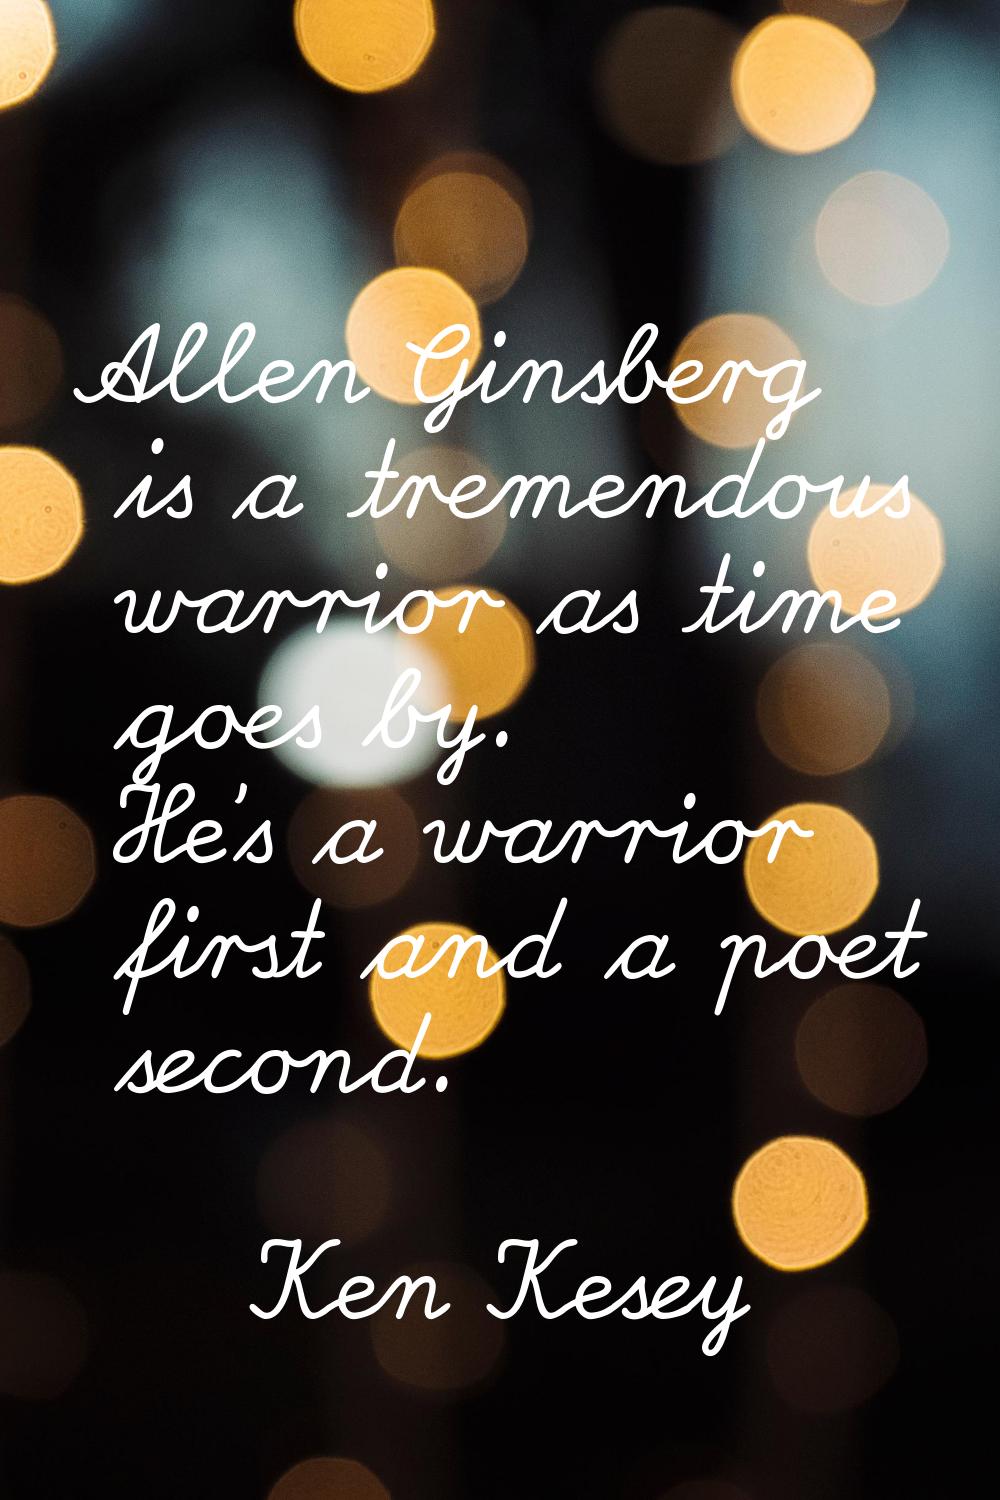 Allen Ginsberg is a tremendous warrior as time goes by. He's a warrior first and a poet second.